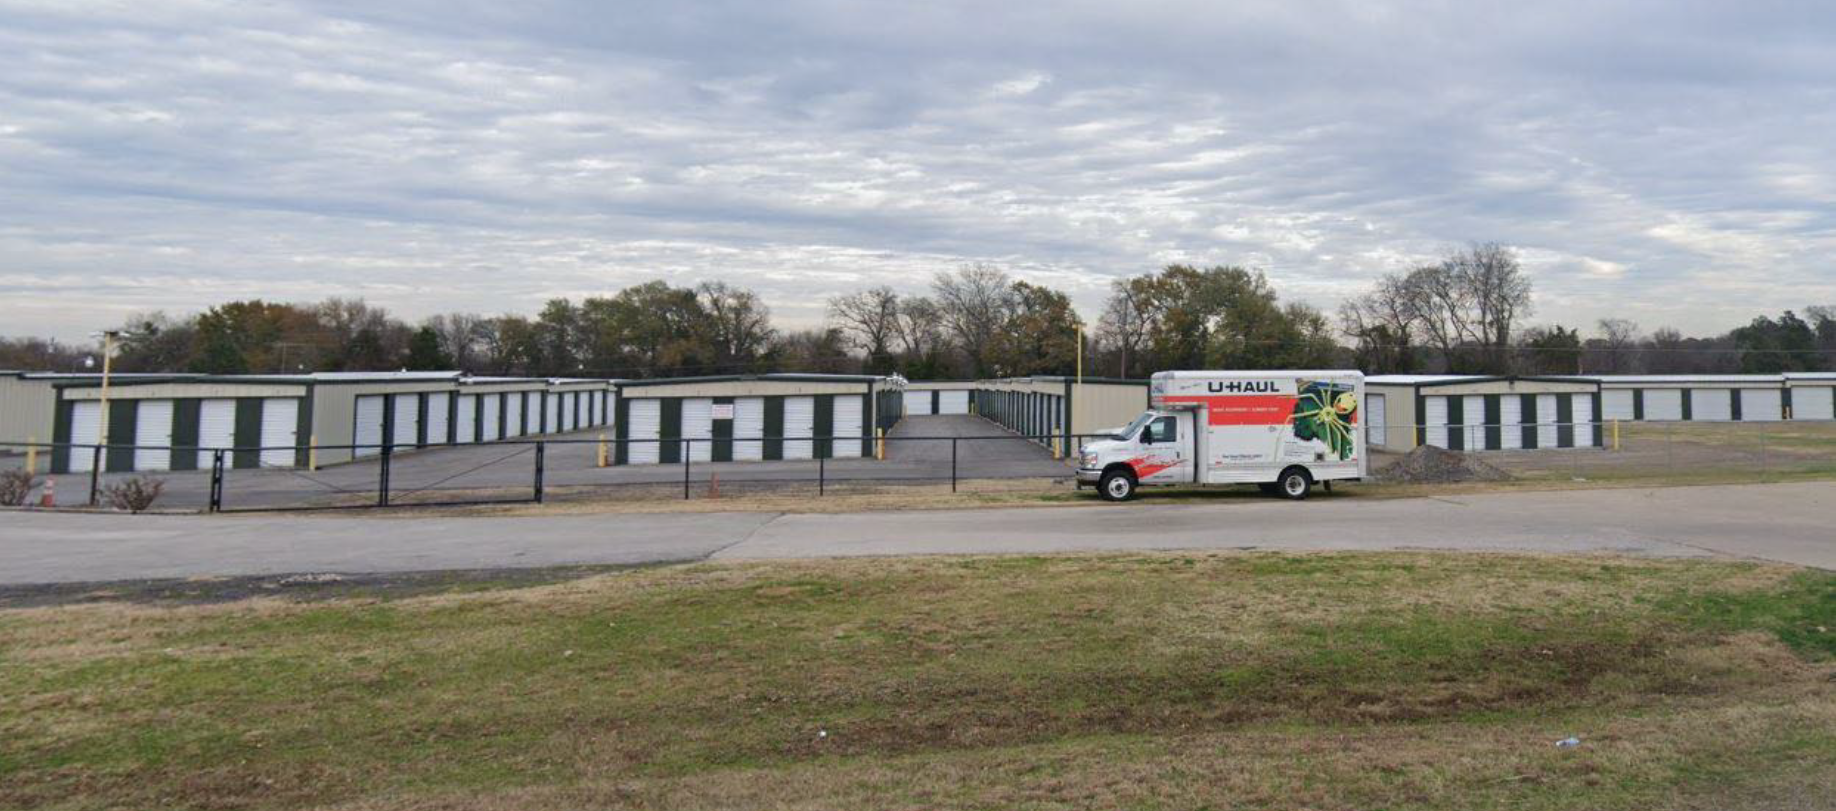 storage facility with full perimeter fence and rental truck